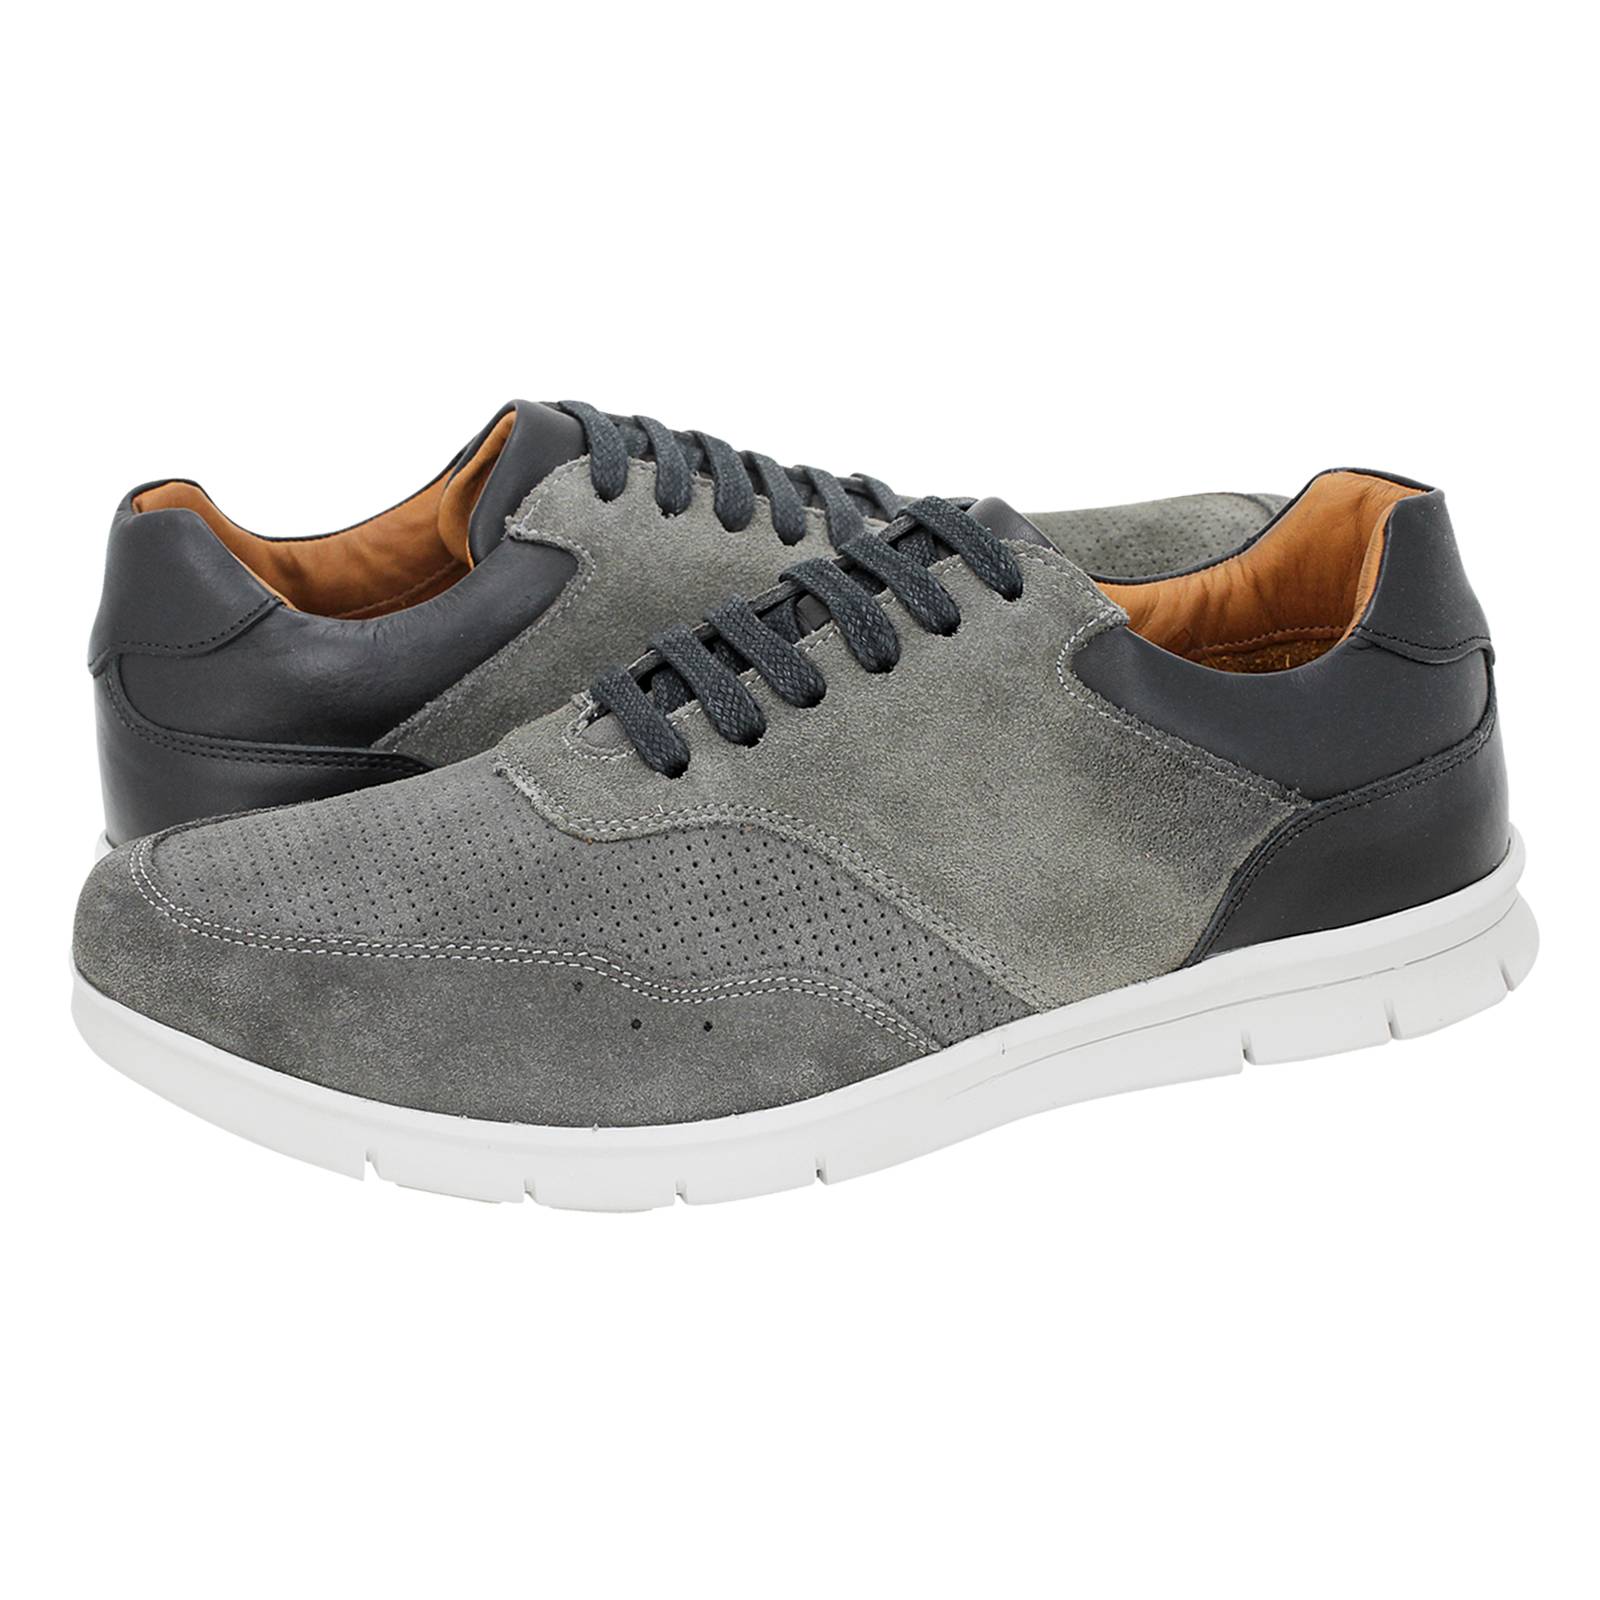 Cheddleton - GK Uomo Comfort Men's casual shoes made of suede and ...